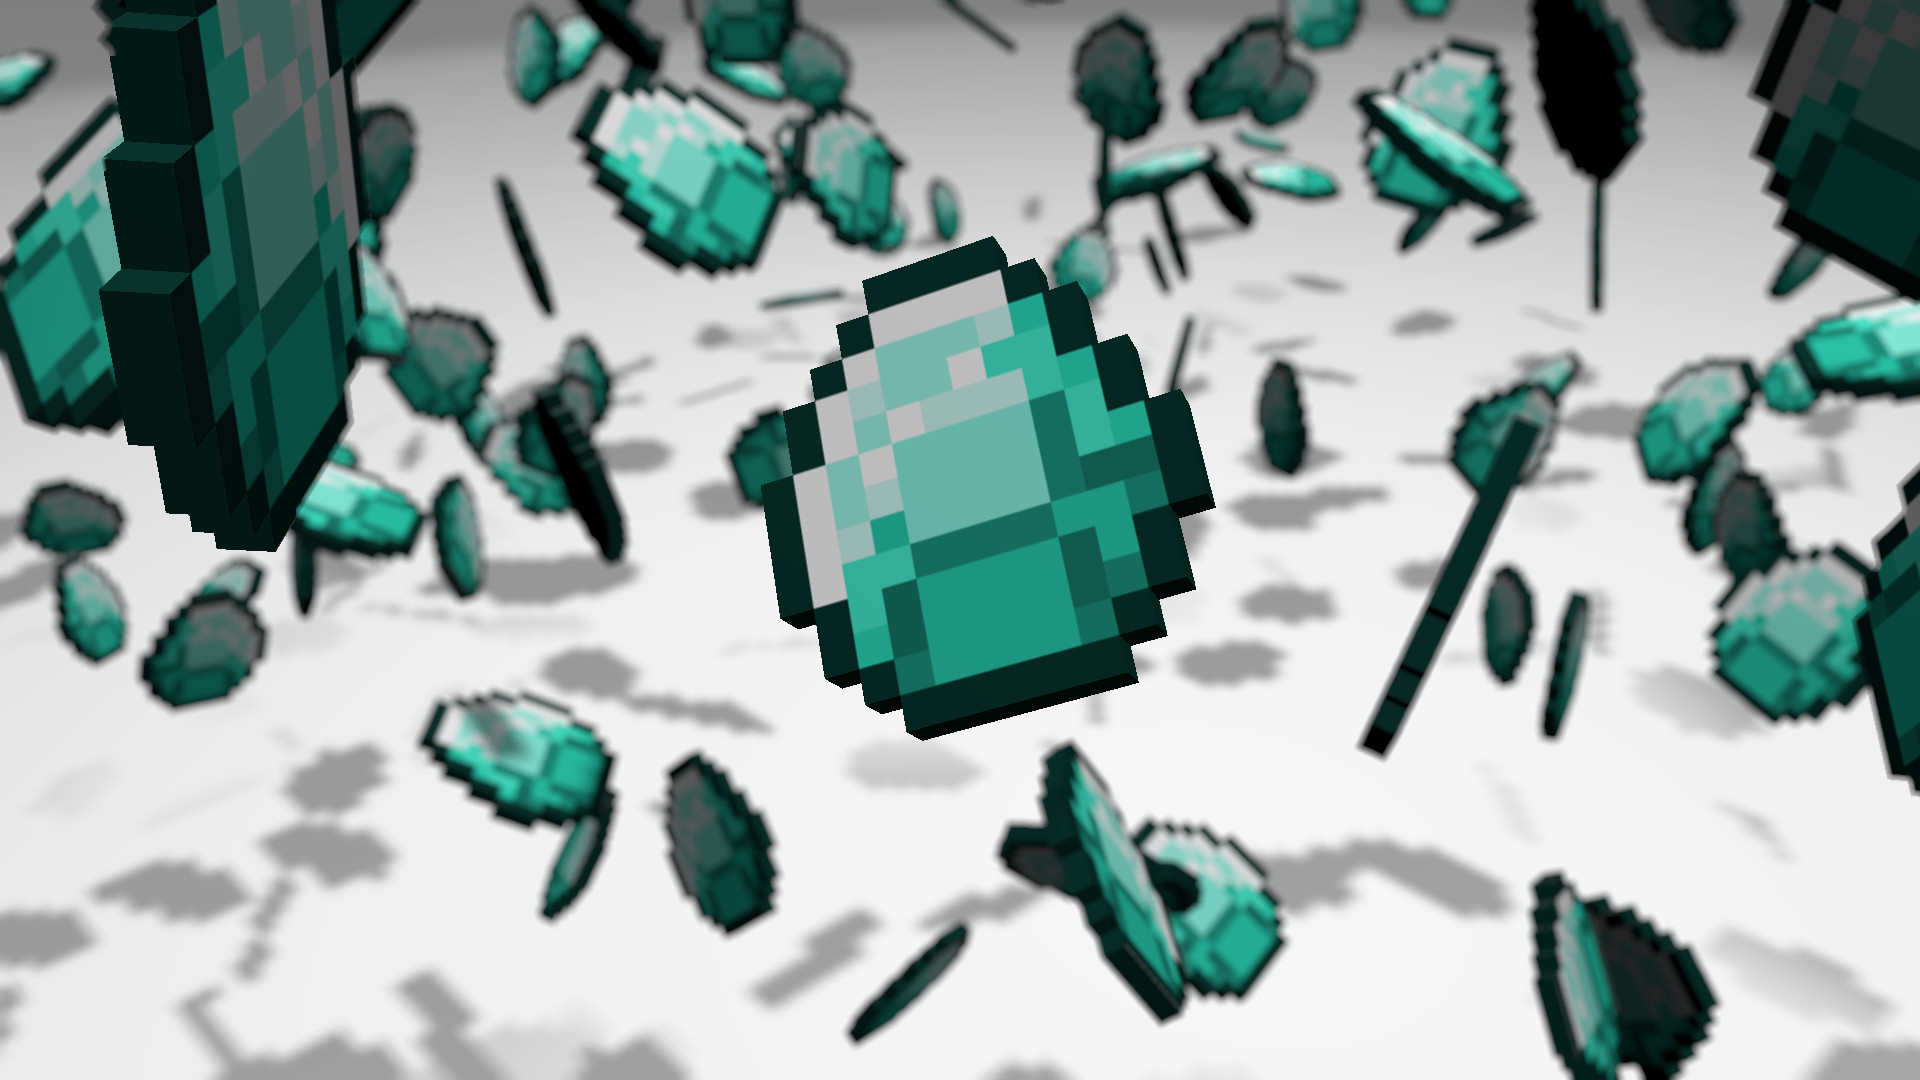 minecraft wallpaper,green,blue,turquoise,turquoise,design